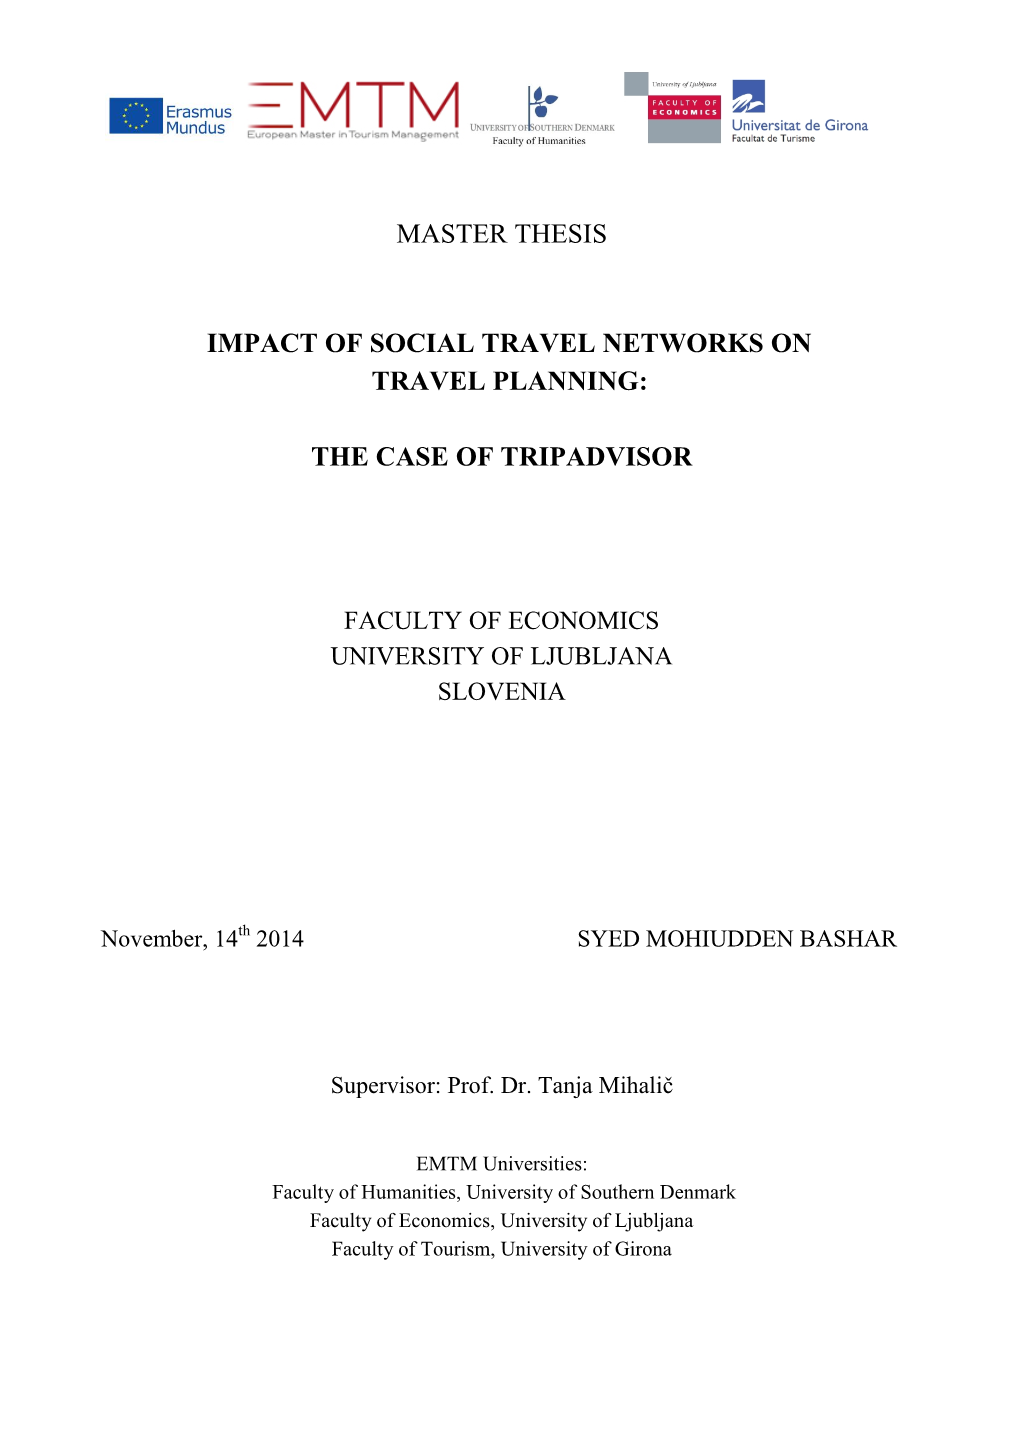 Master Thesis Impact of Social Travel Networks on Travel Planning